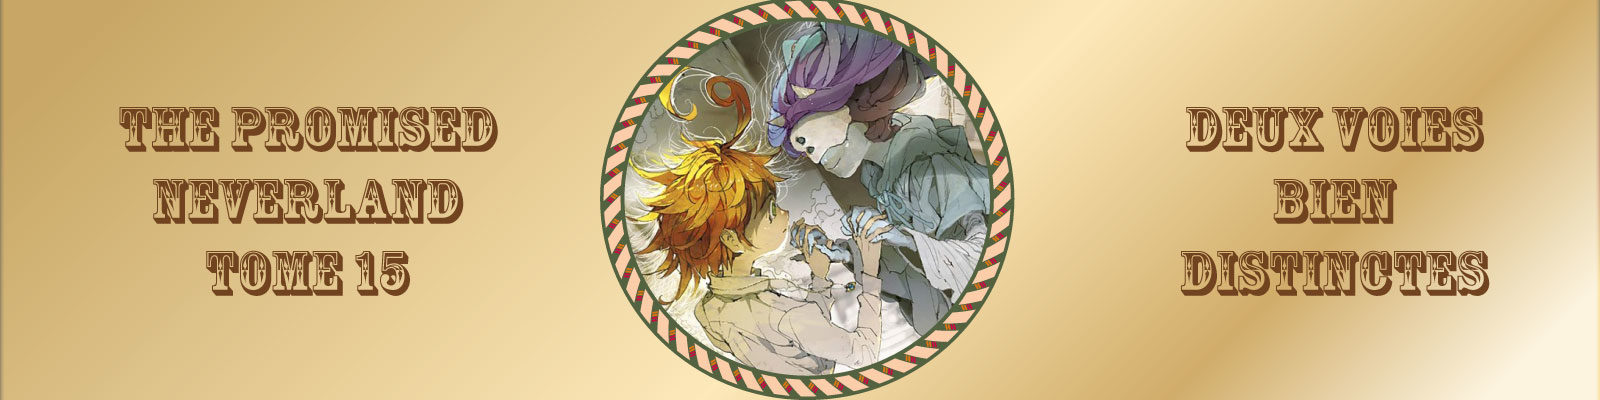 The Promised Neverland T15